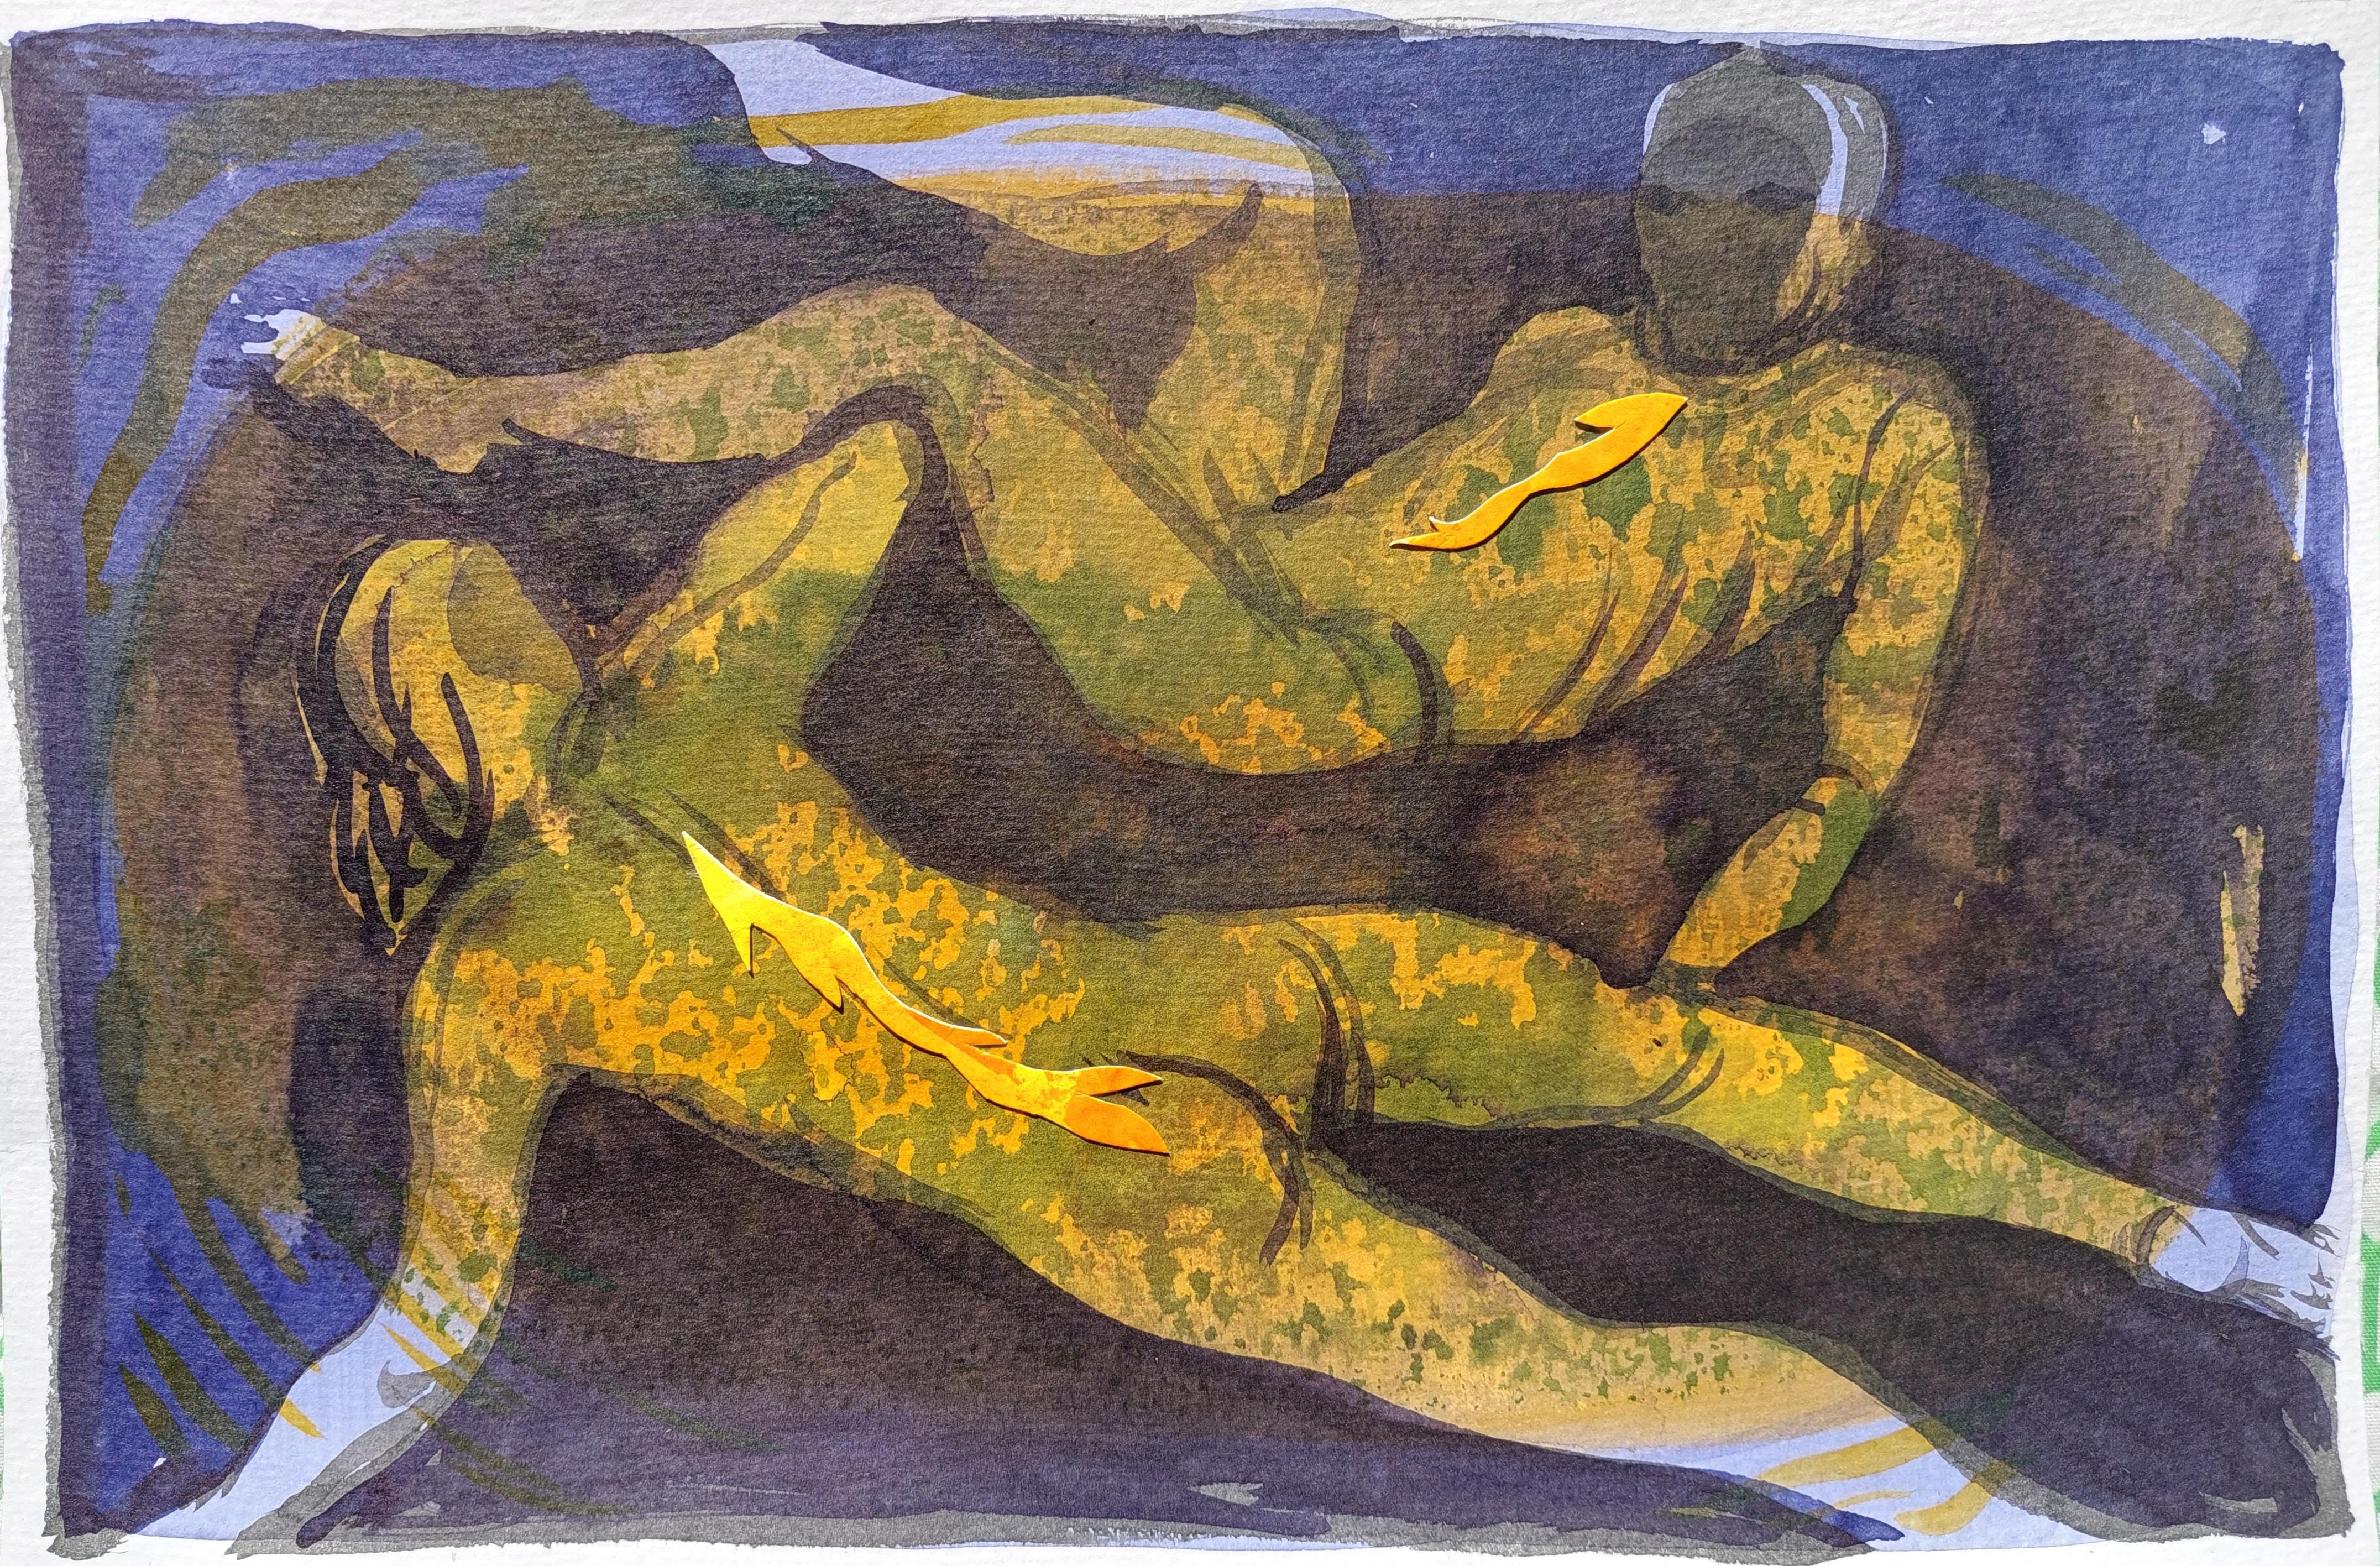 Grazyna Rigall Nude - Vortex, Love Couple - Contemporary Figurative Ink Painting, New Expression